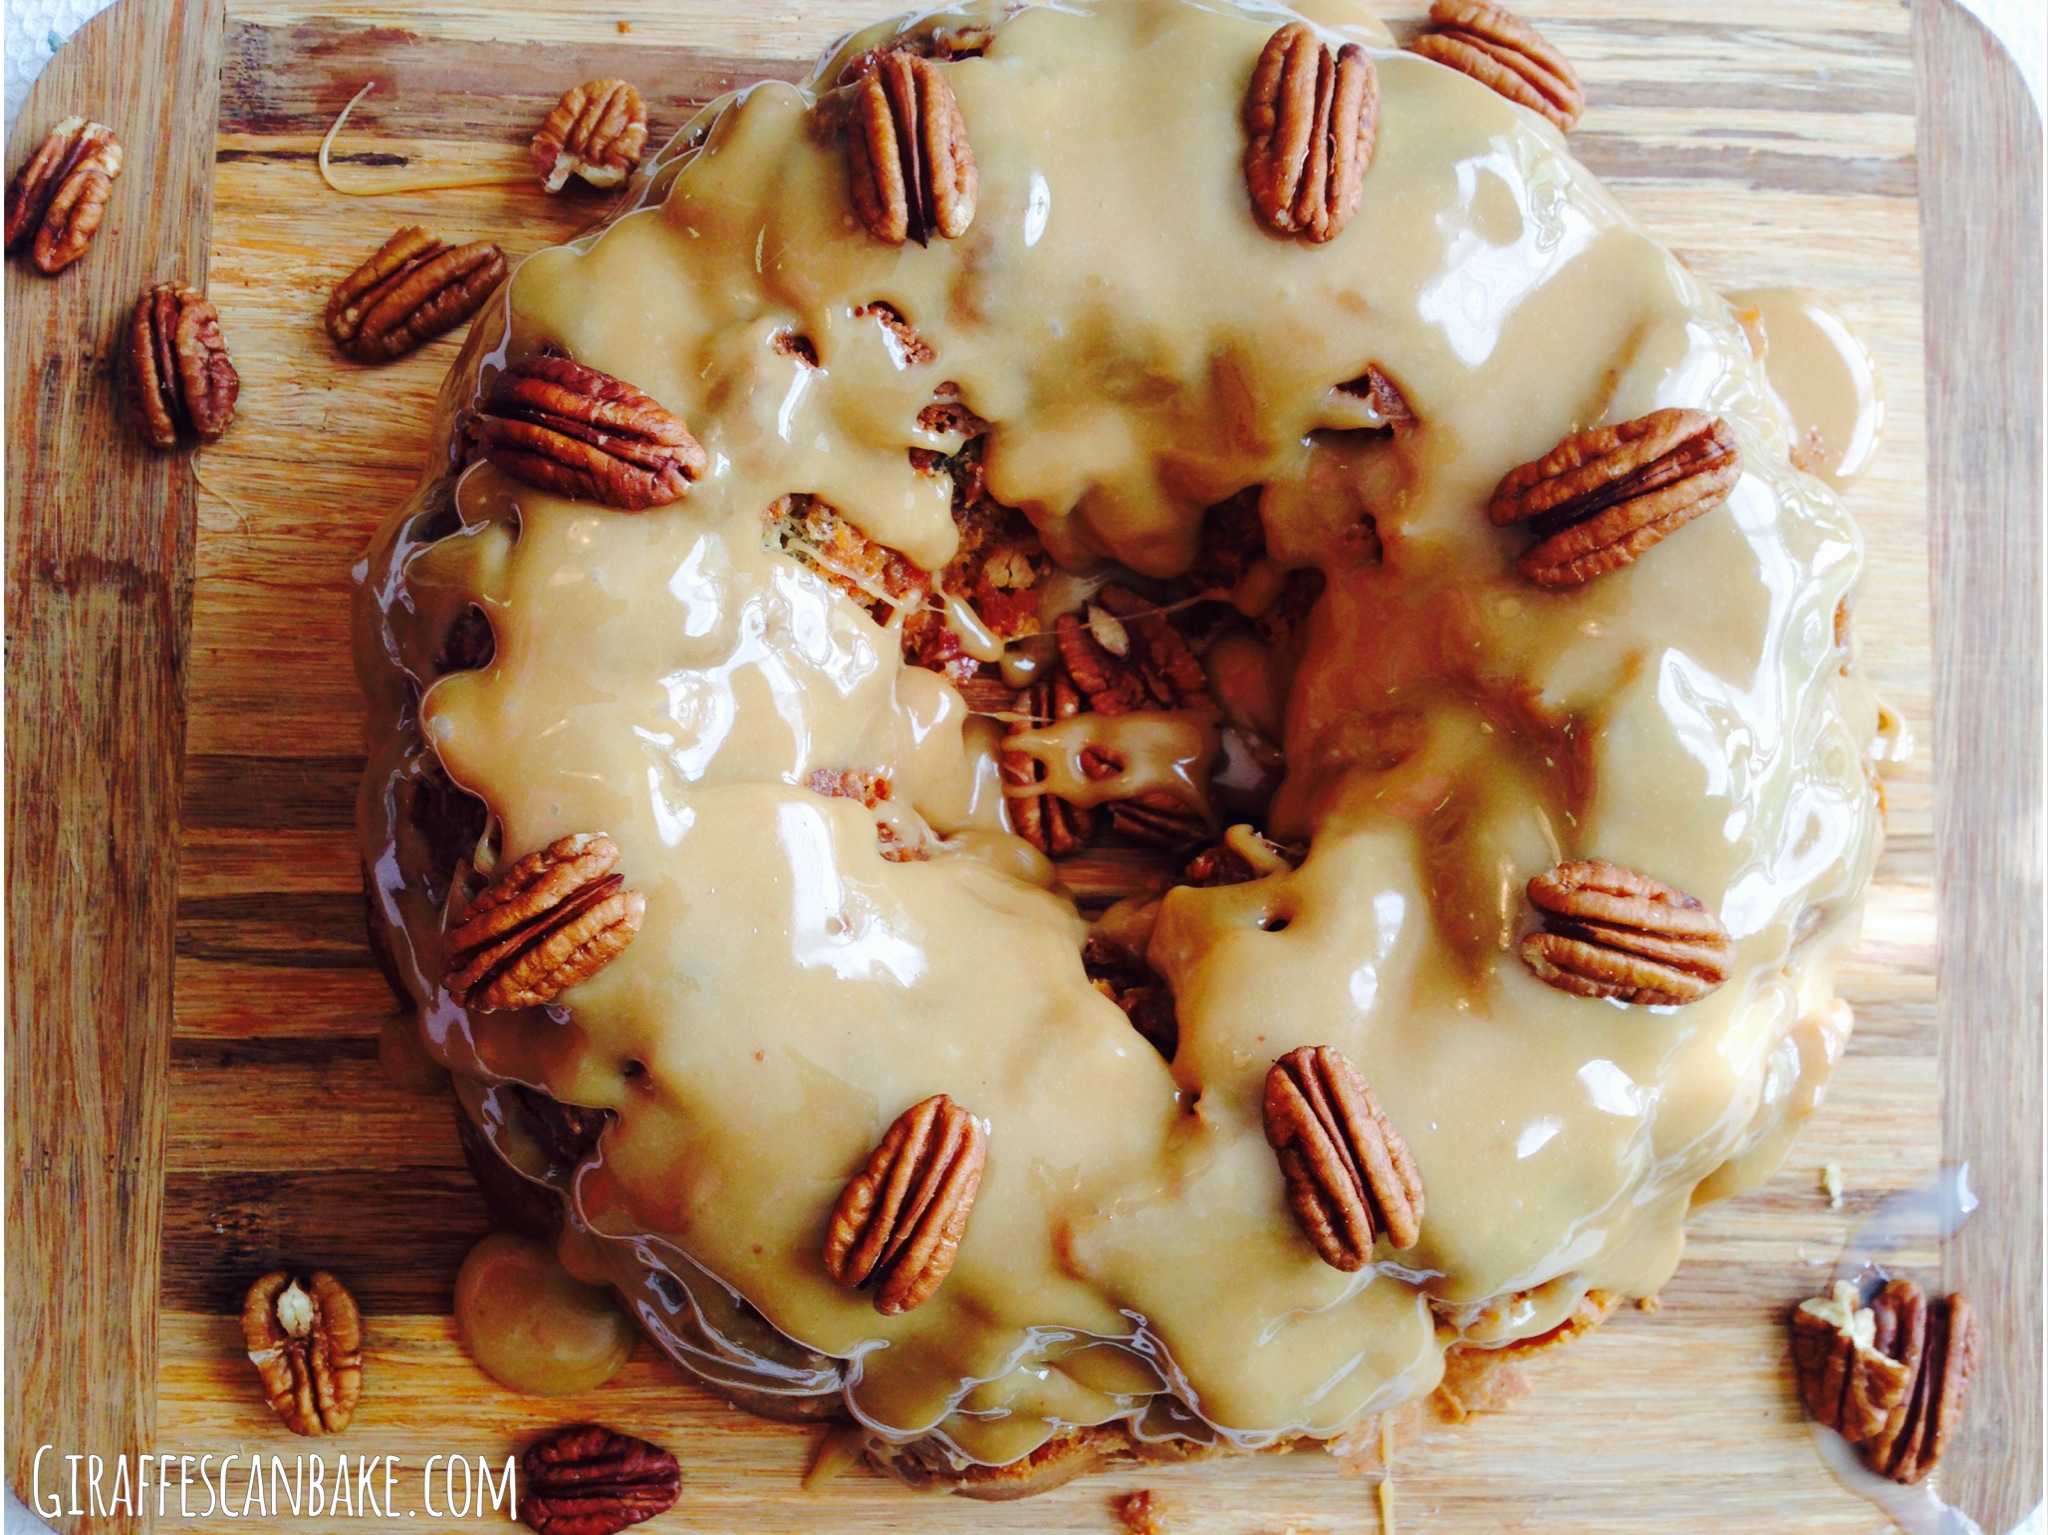 Brown Sugar and Pecan Caramel Bundt Cake - a moist and tender bundt cake stuffed full of pecans and toffee, smothered with thick caramel and topped with pecans!